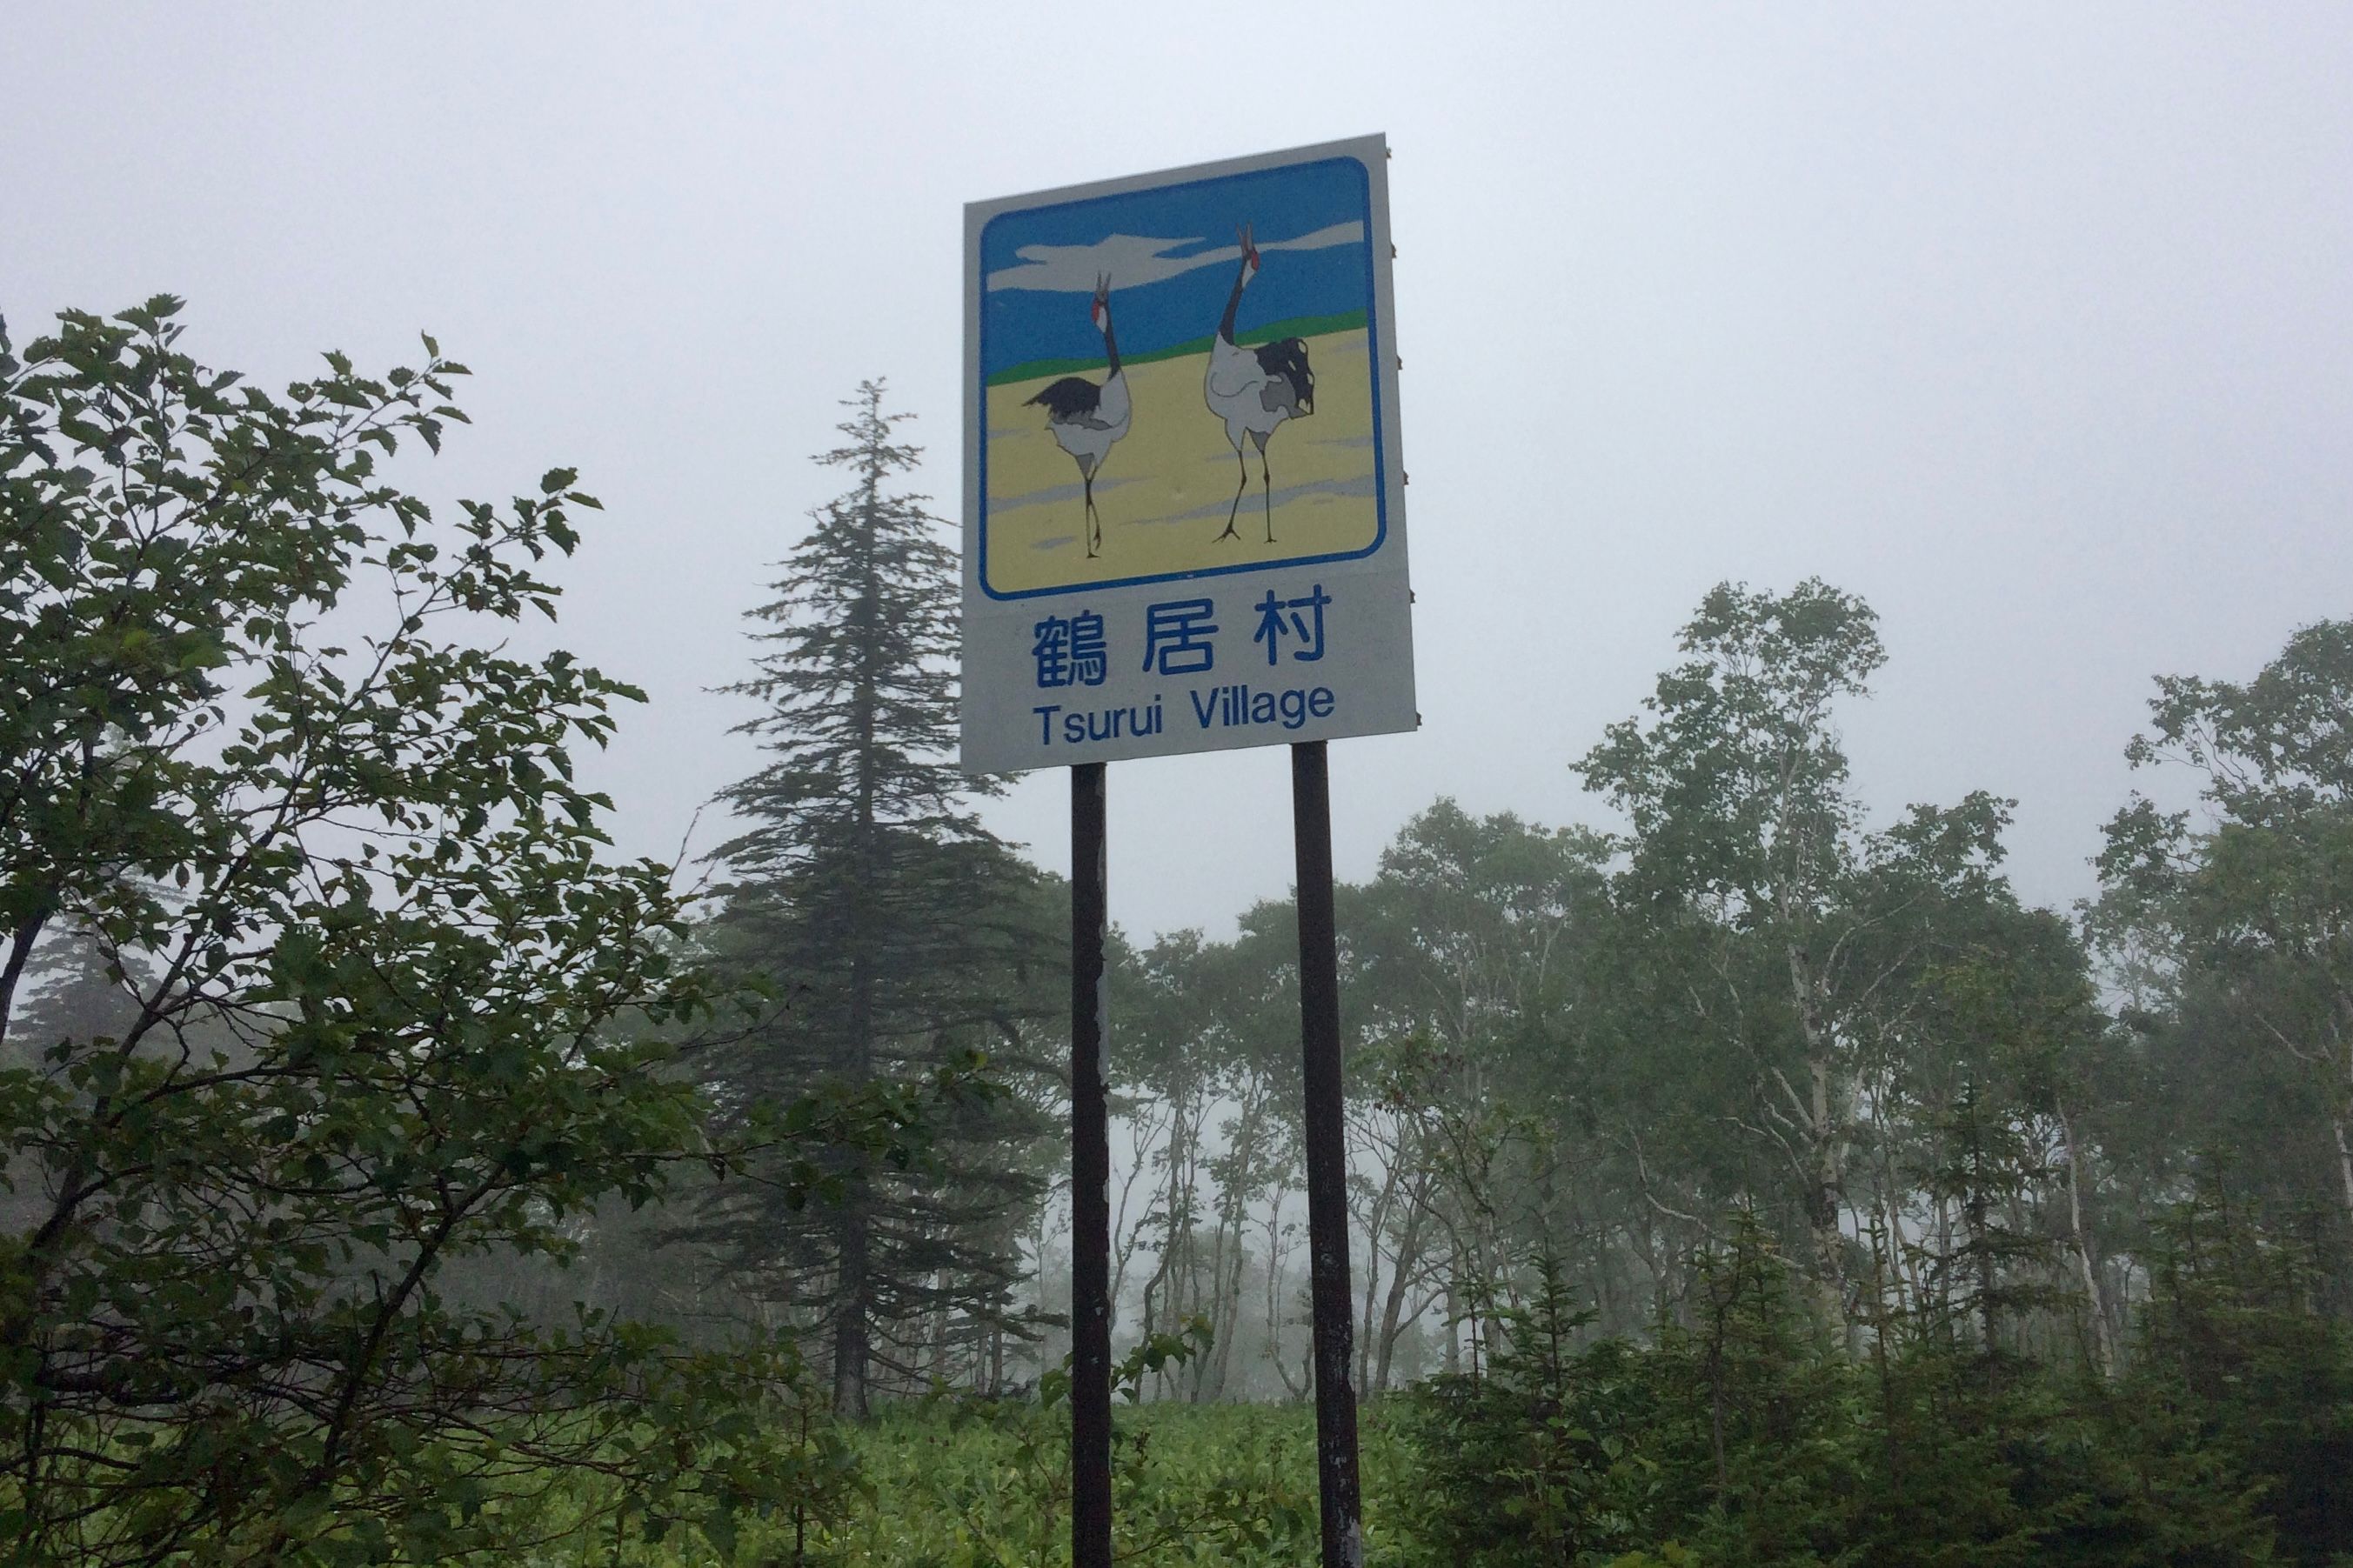 A road sign in a misty forest, decorated with a pair of red-crowned cranes, marks the boundary of Tsurui Village, whose name translates to “crane residence”.